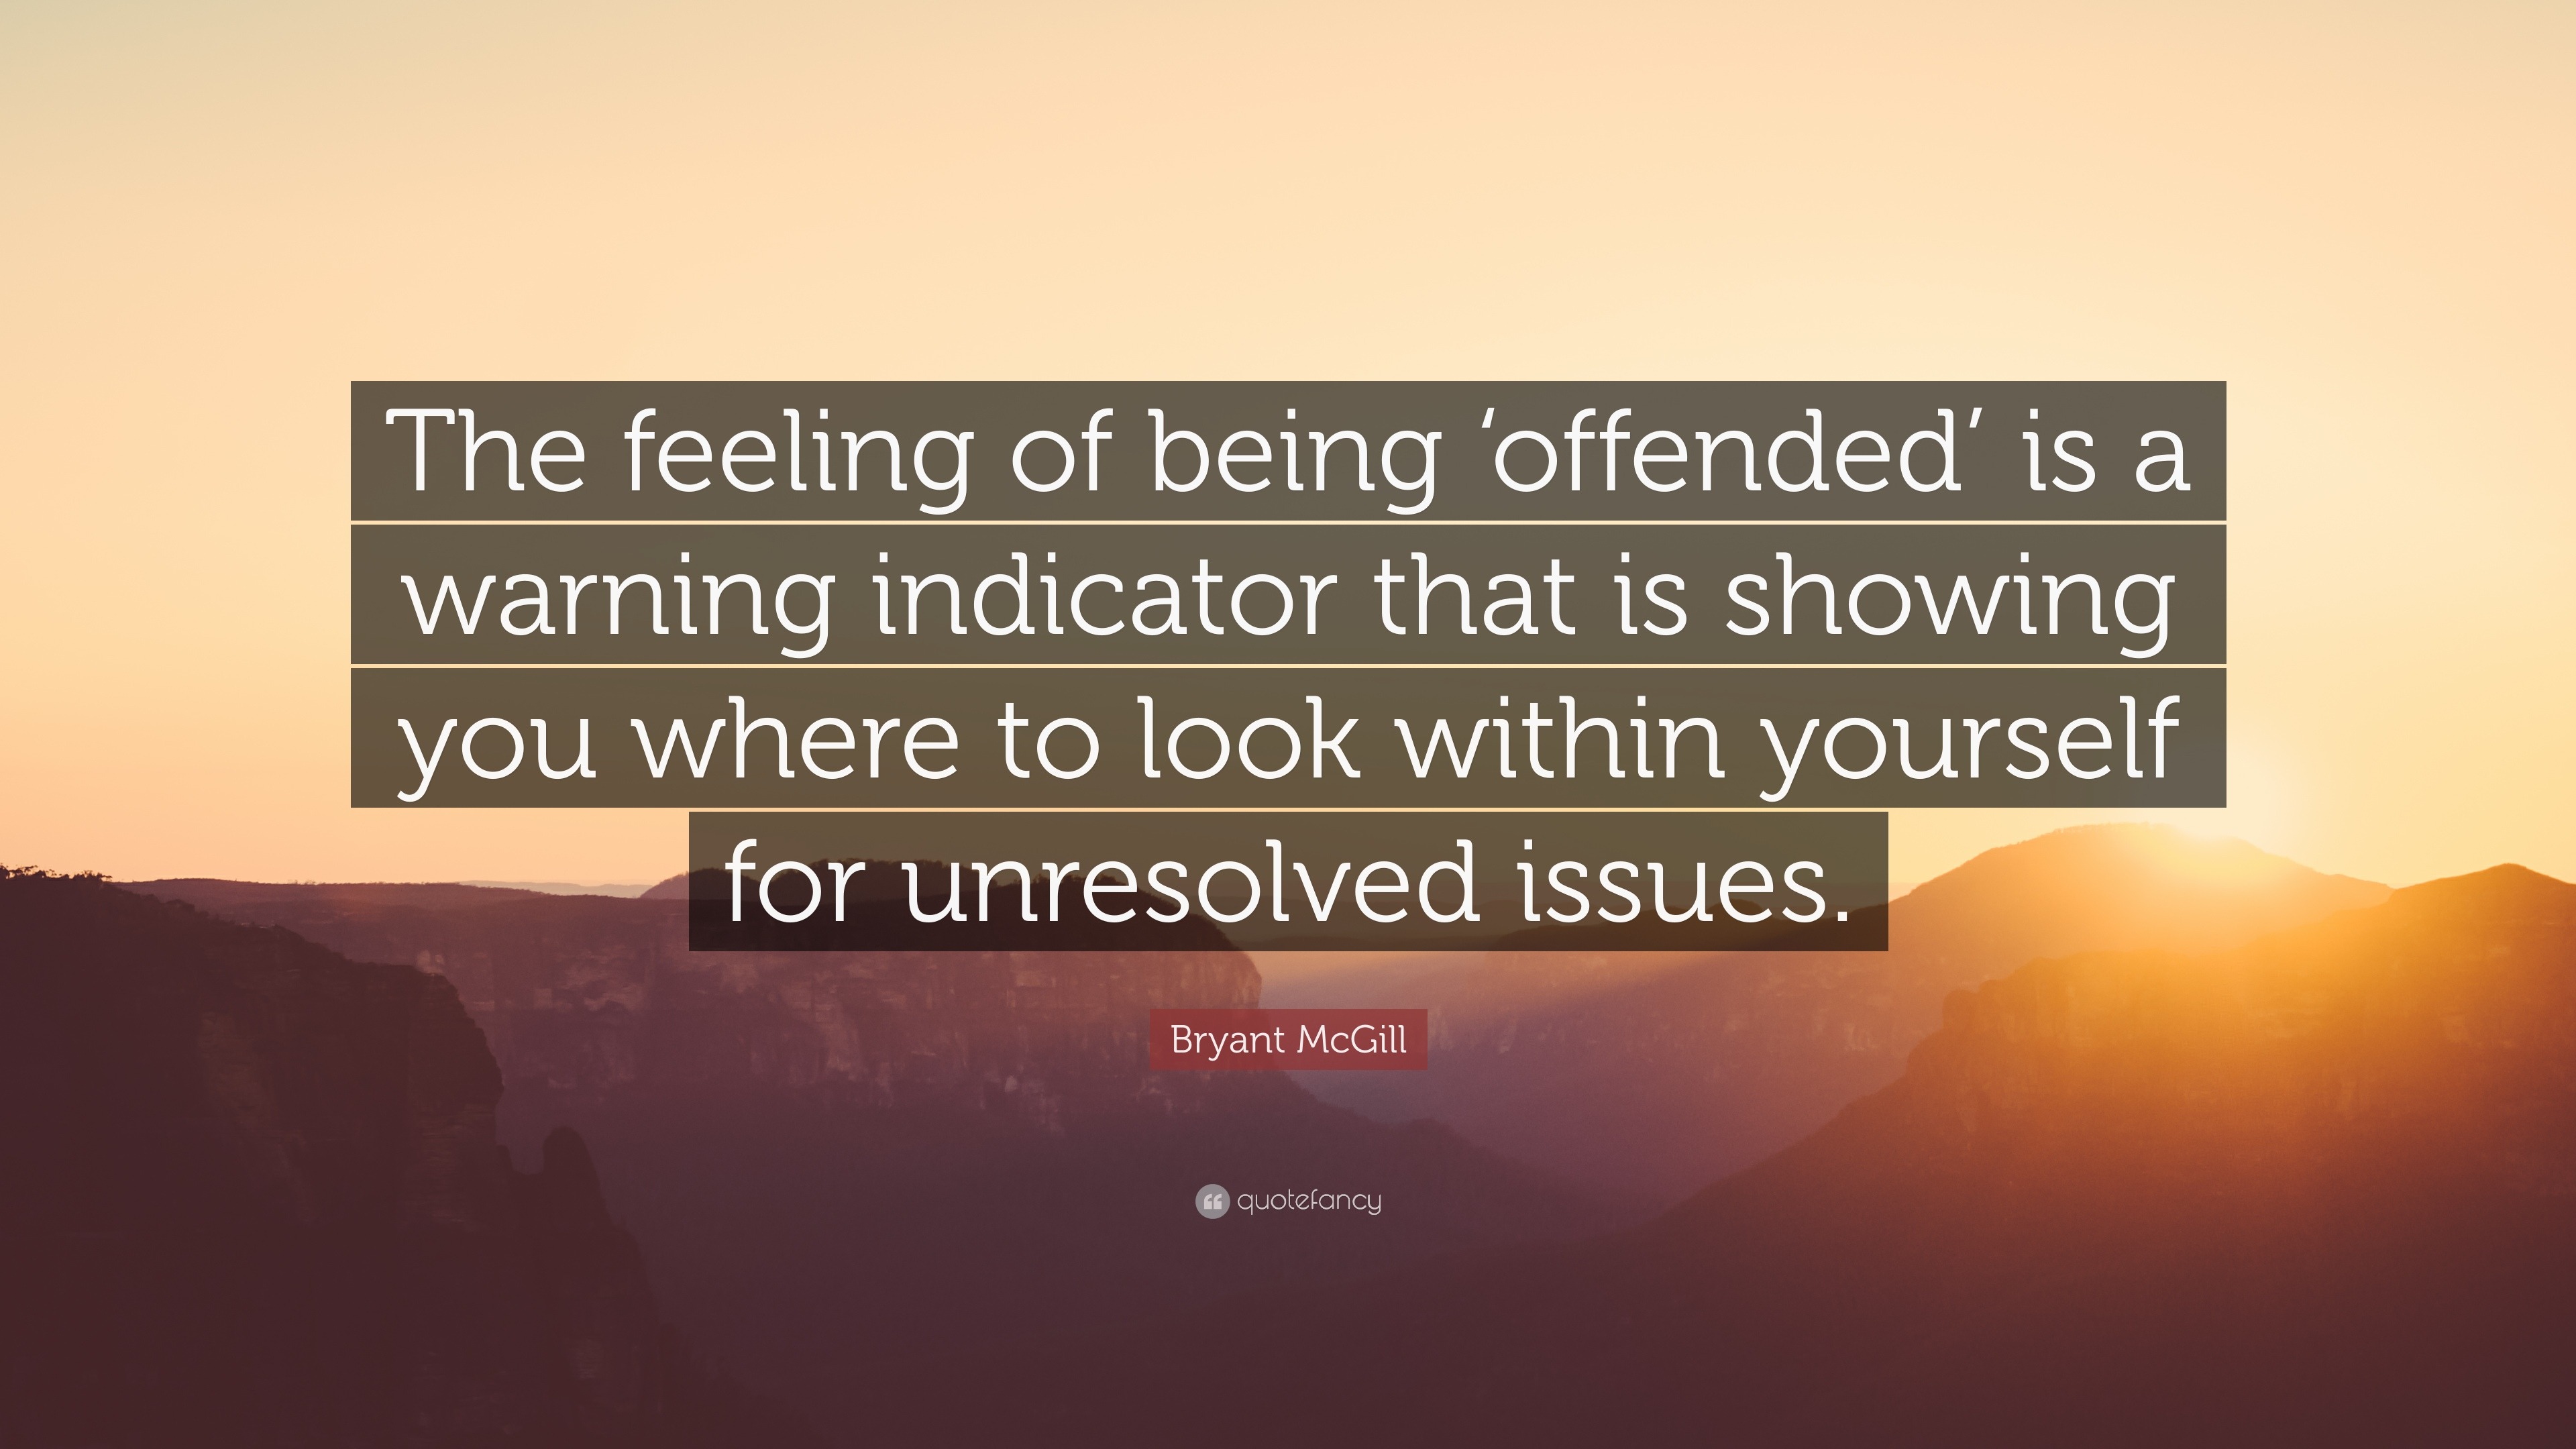 Bryant McGill Quote: “The feeling of being ‘offended’ is a warning